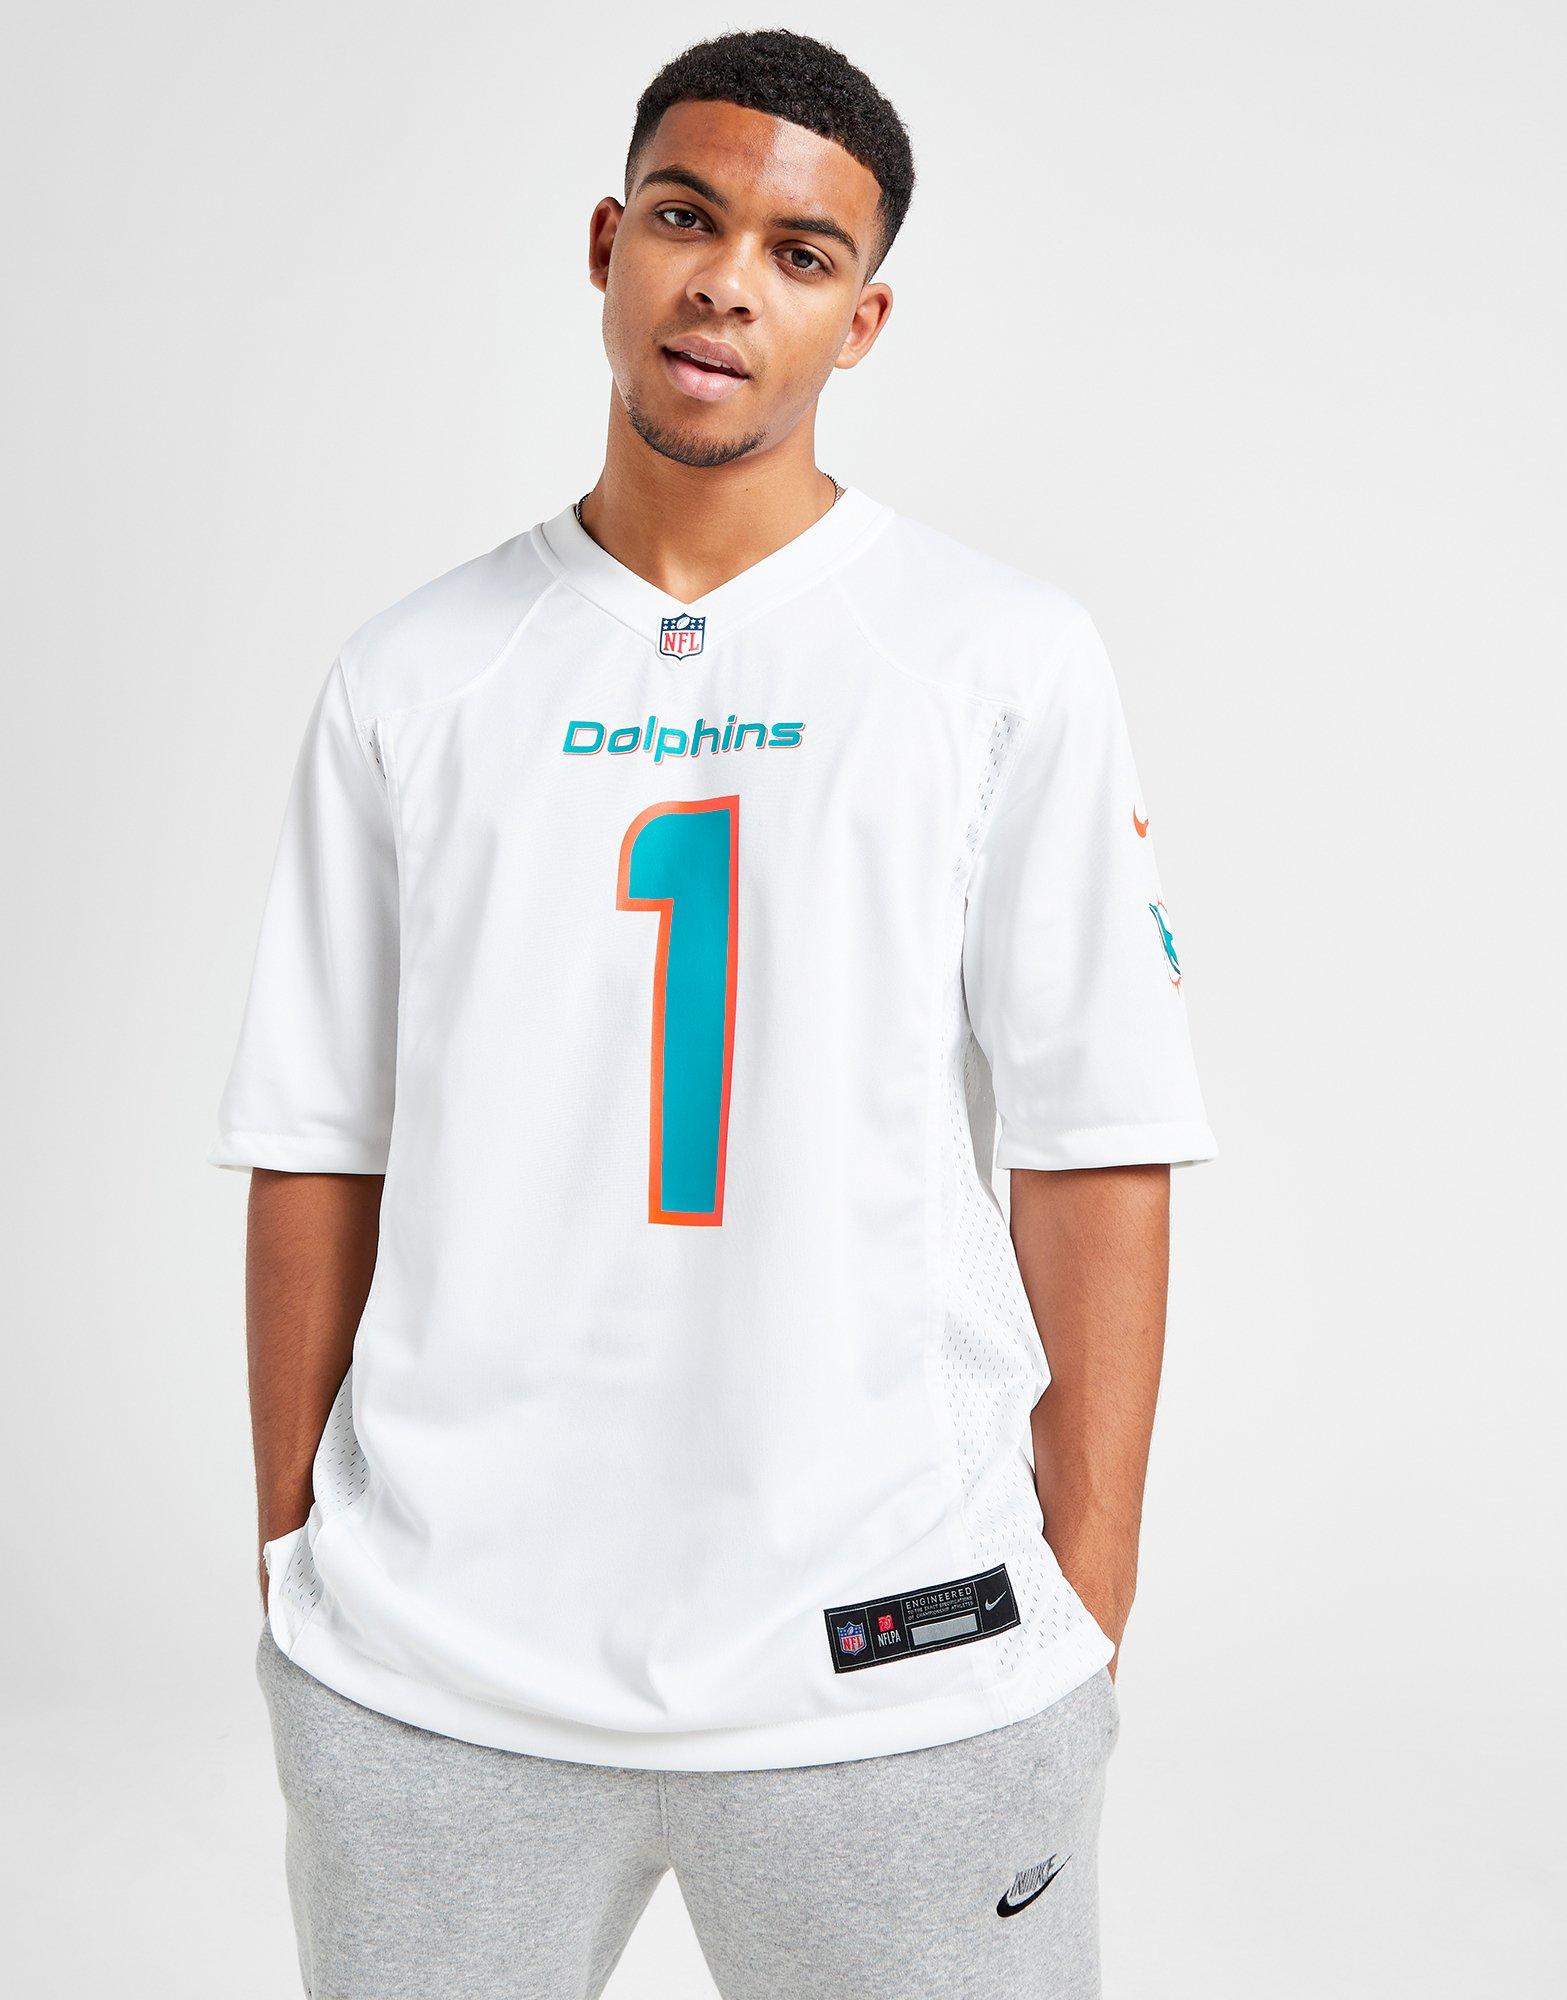 Miami Dolphins NFL Jersey Shopping Bag Tote